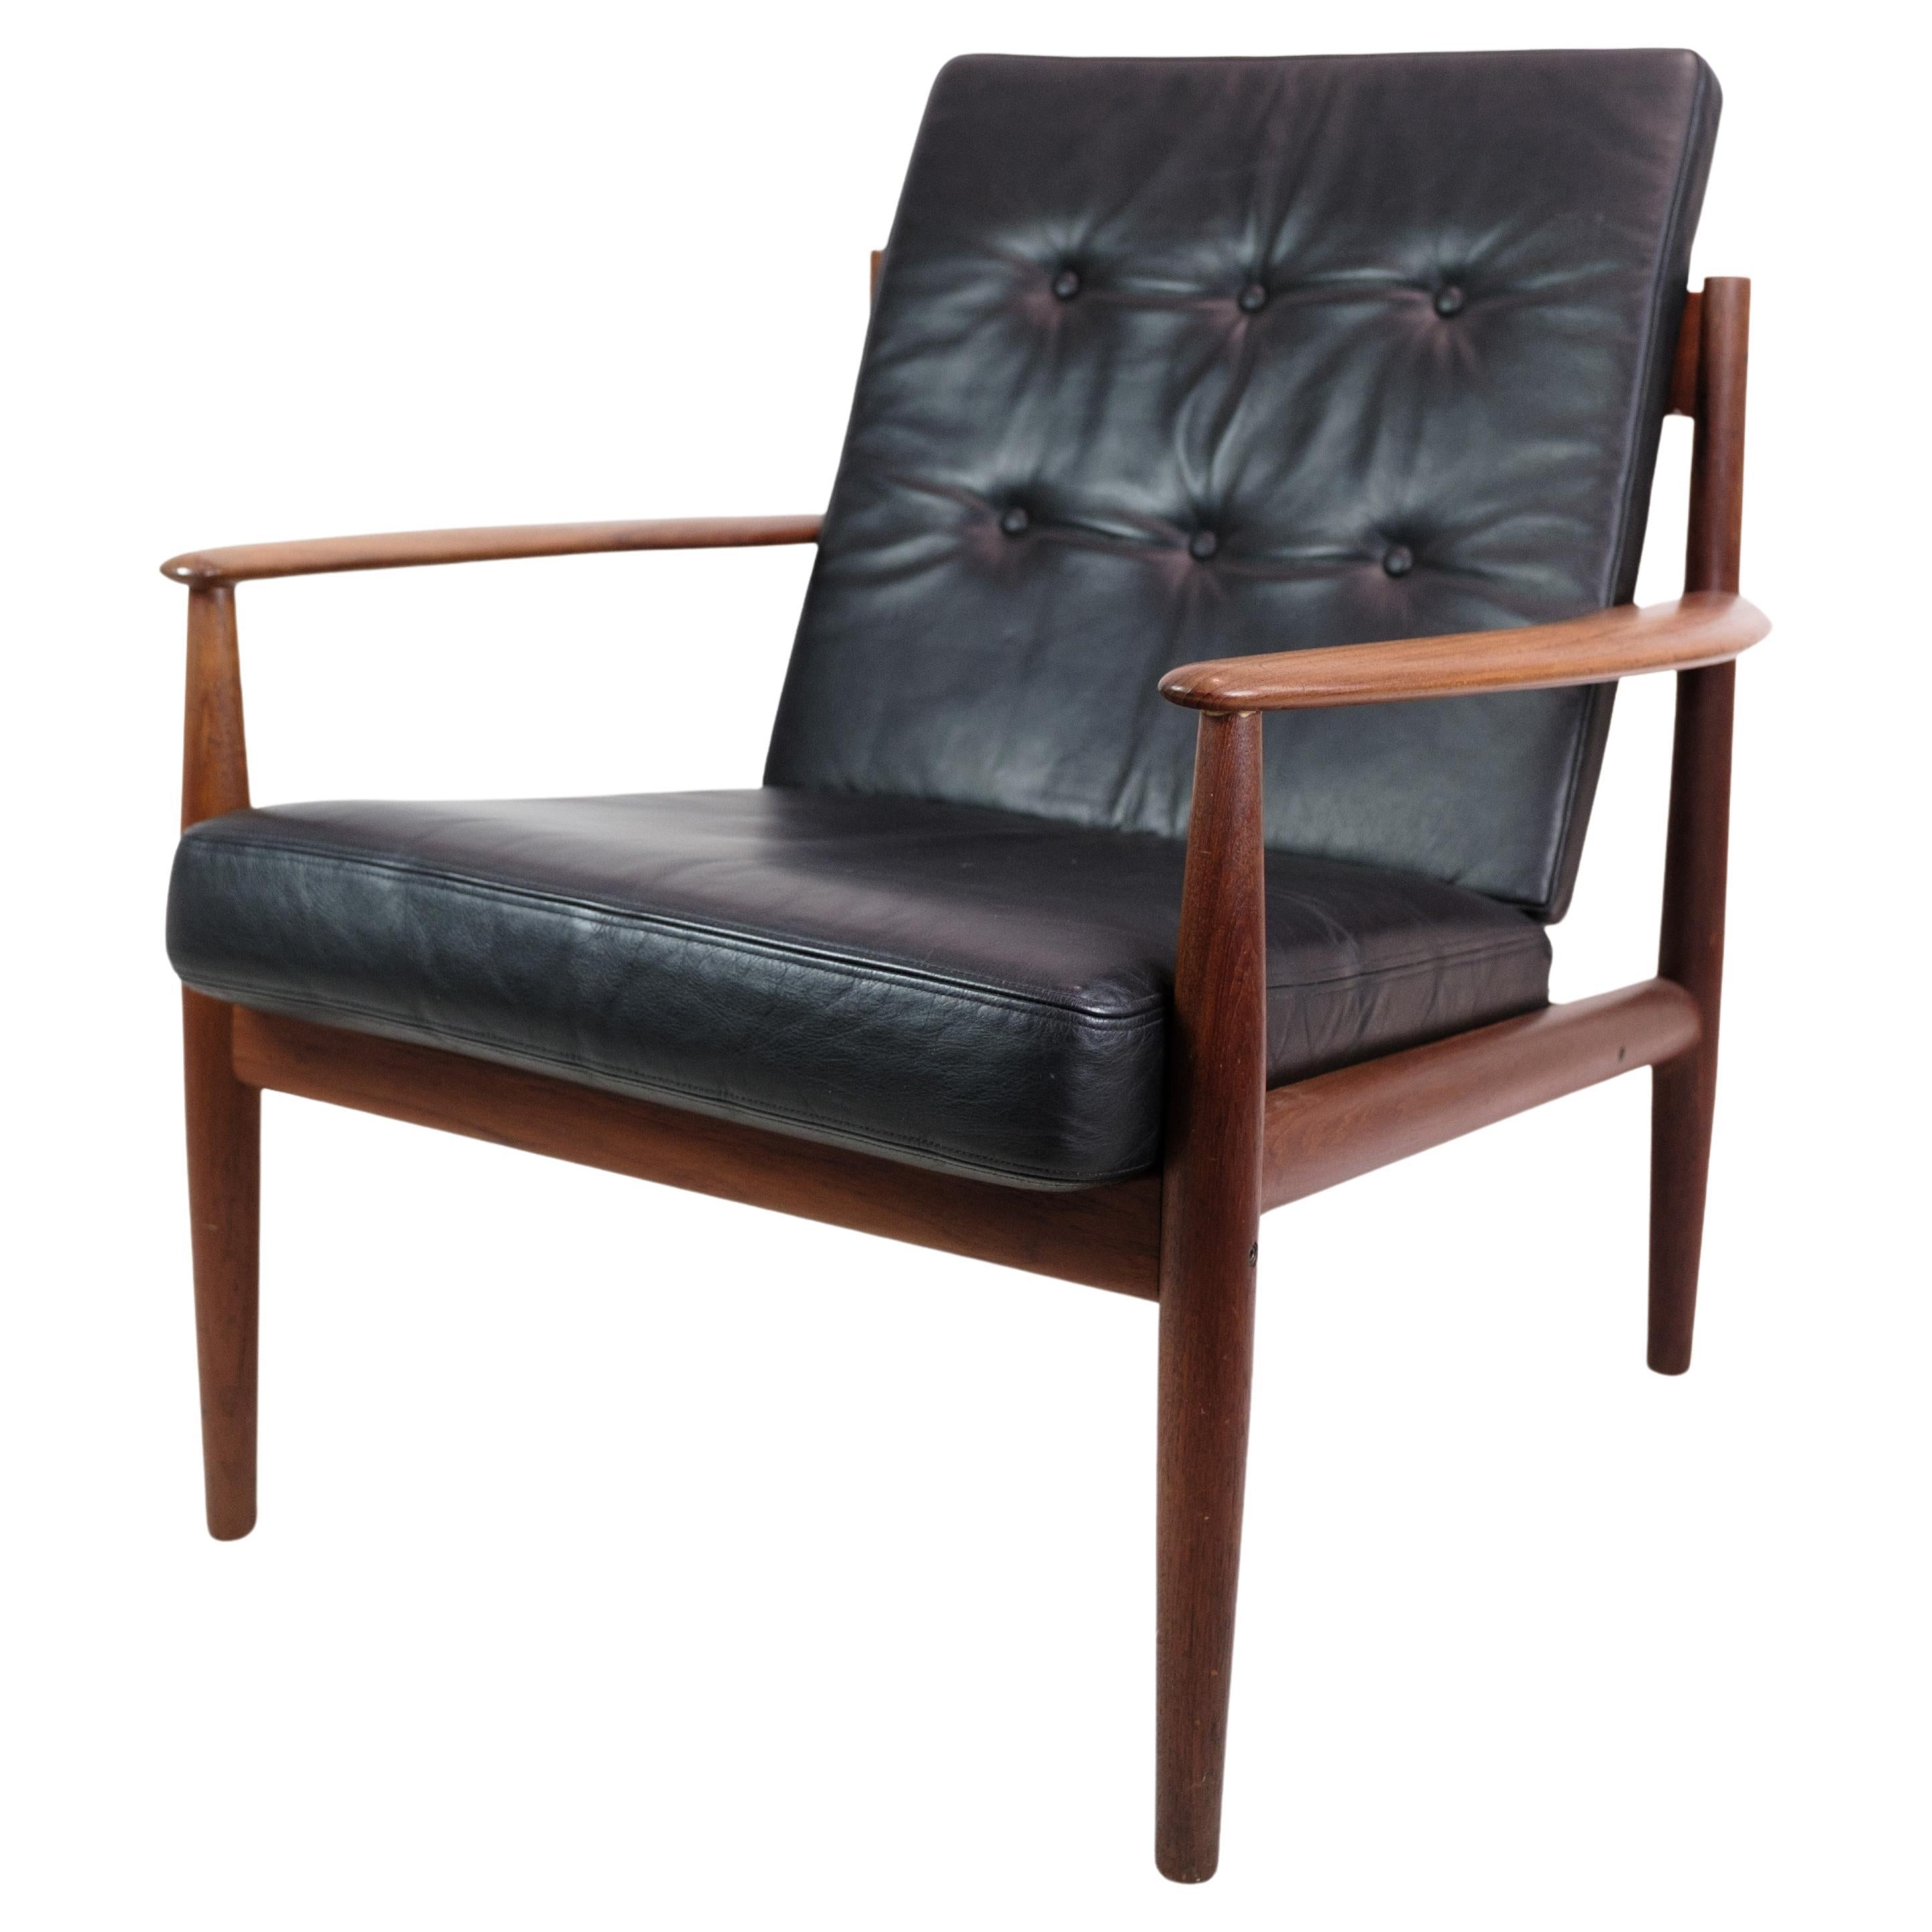 Armchair In Teak and black leather, Model 118 Designed By Grete Jalk From 1960s